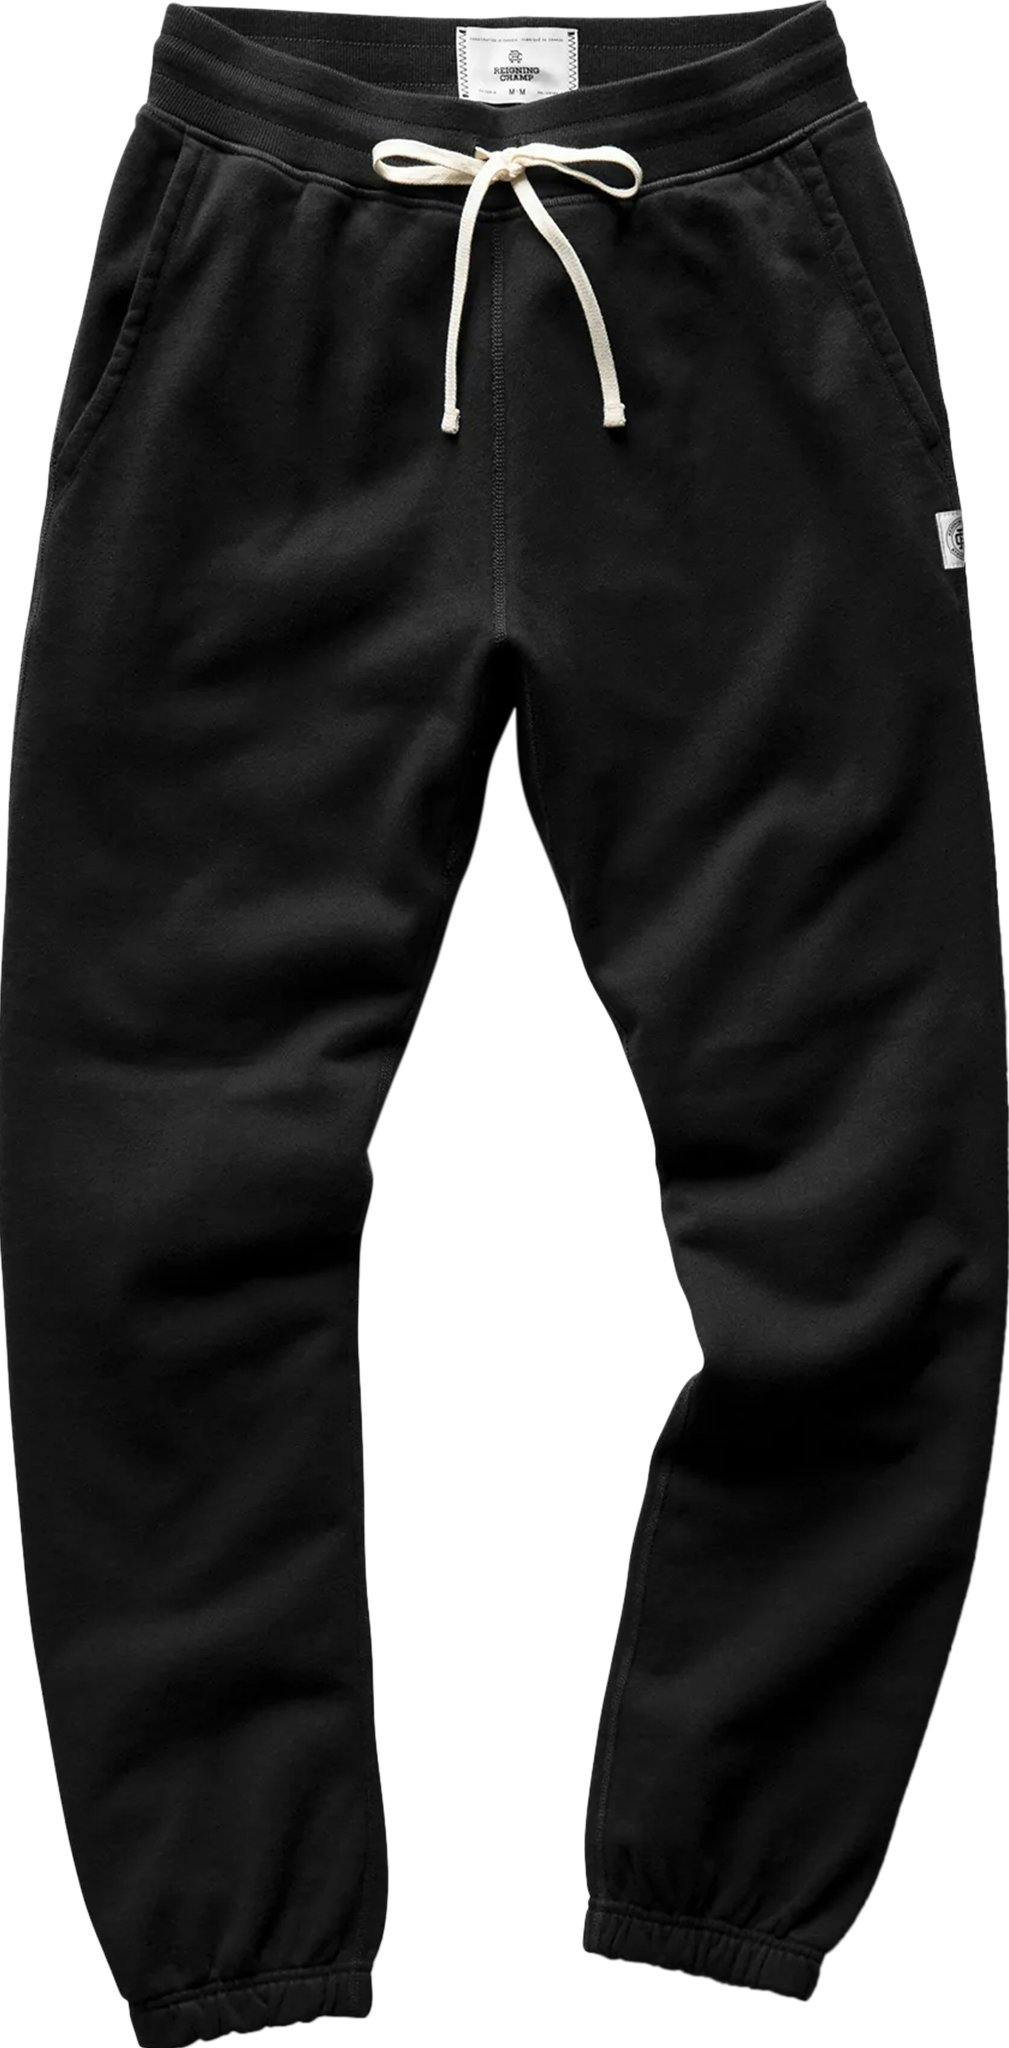 Product image for Midweight Terry Cuffed Sweatpant - Mens